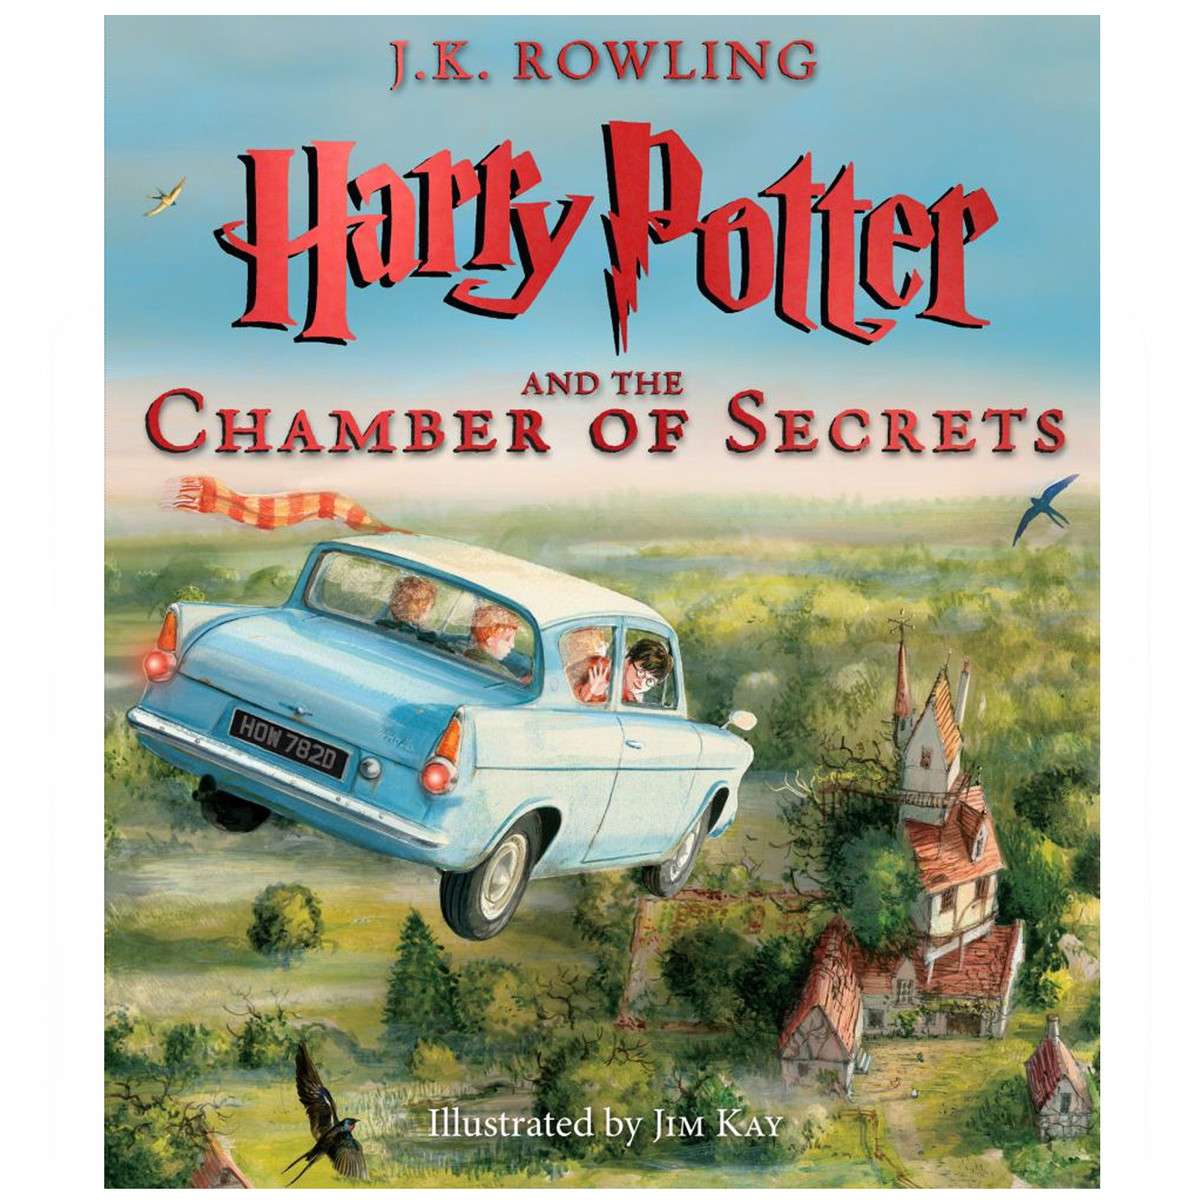 Harry Potter And The Chamber Of Secrets by JK Rowling Illustrated by ...